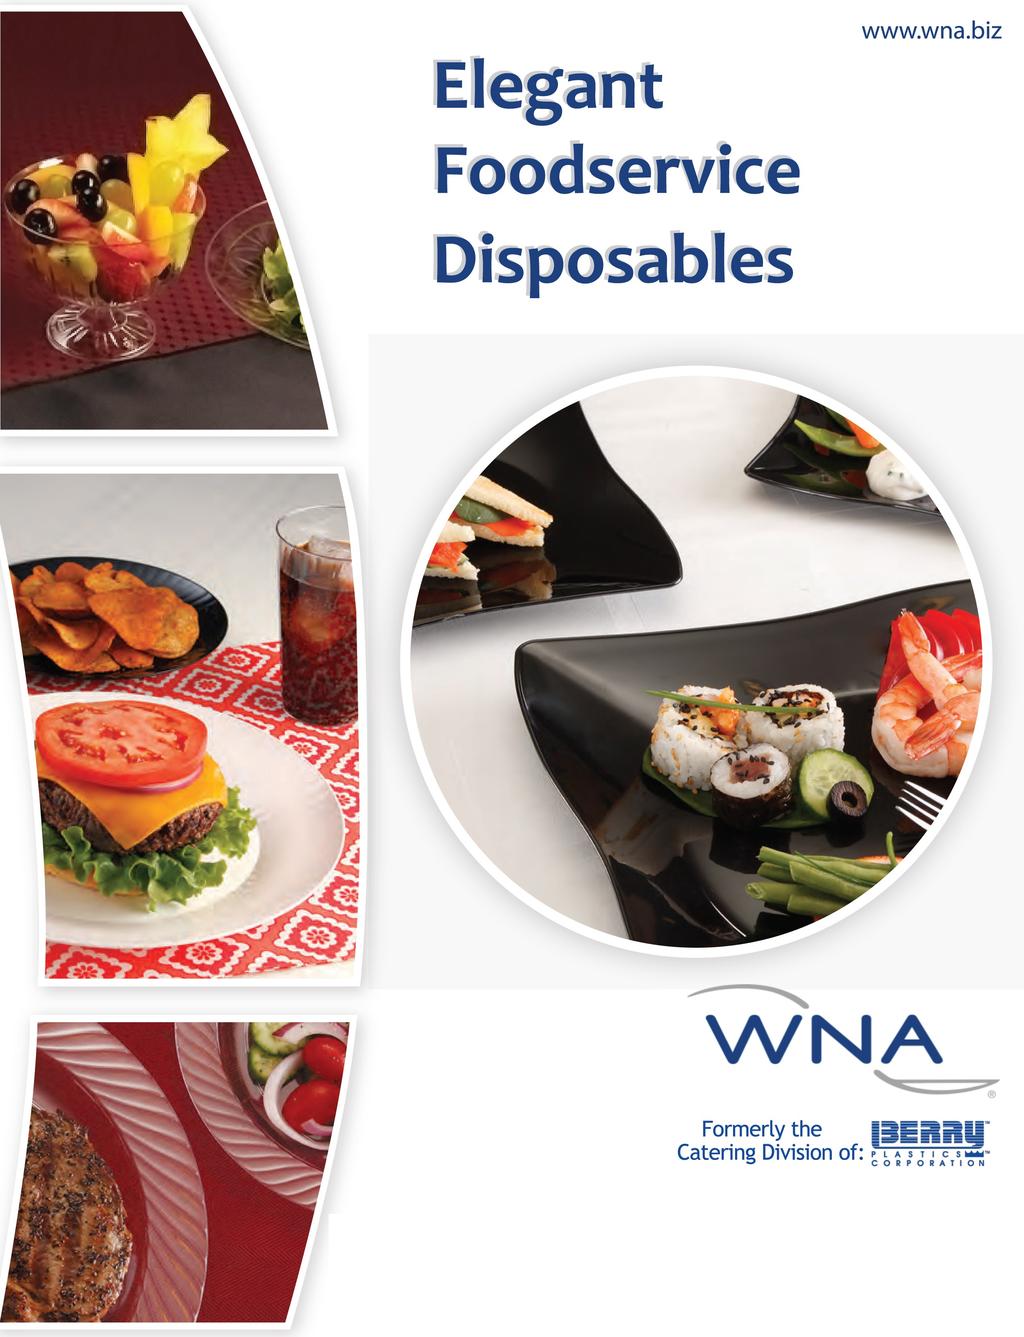 Effective October 28, 2013, please place all orders for Berry Catering and Kit products directly with WNA.